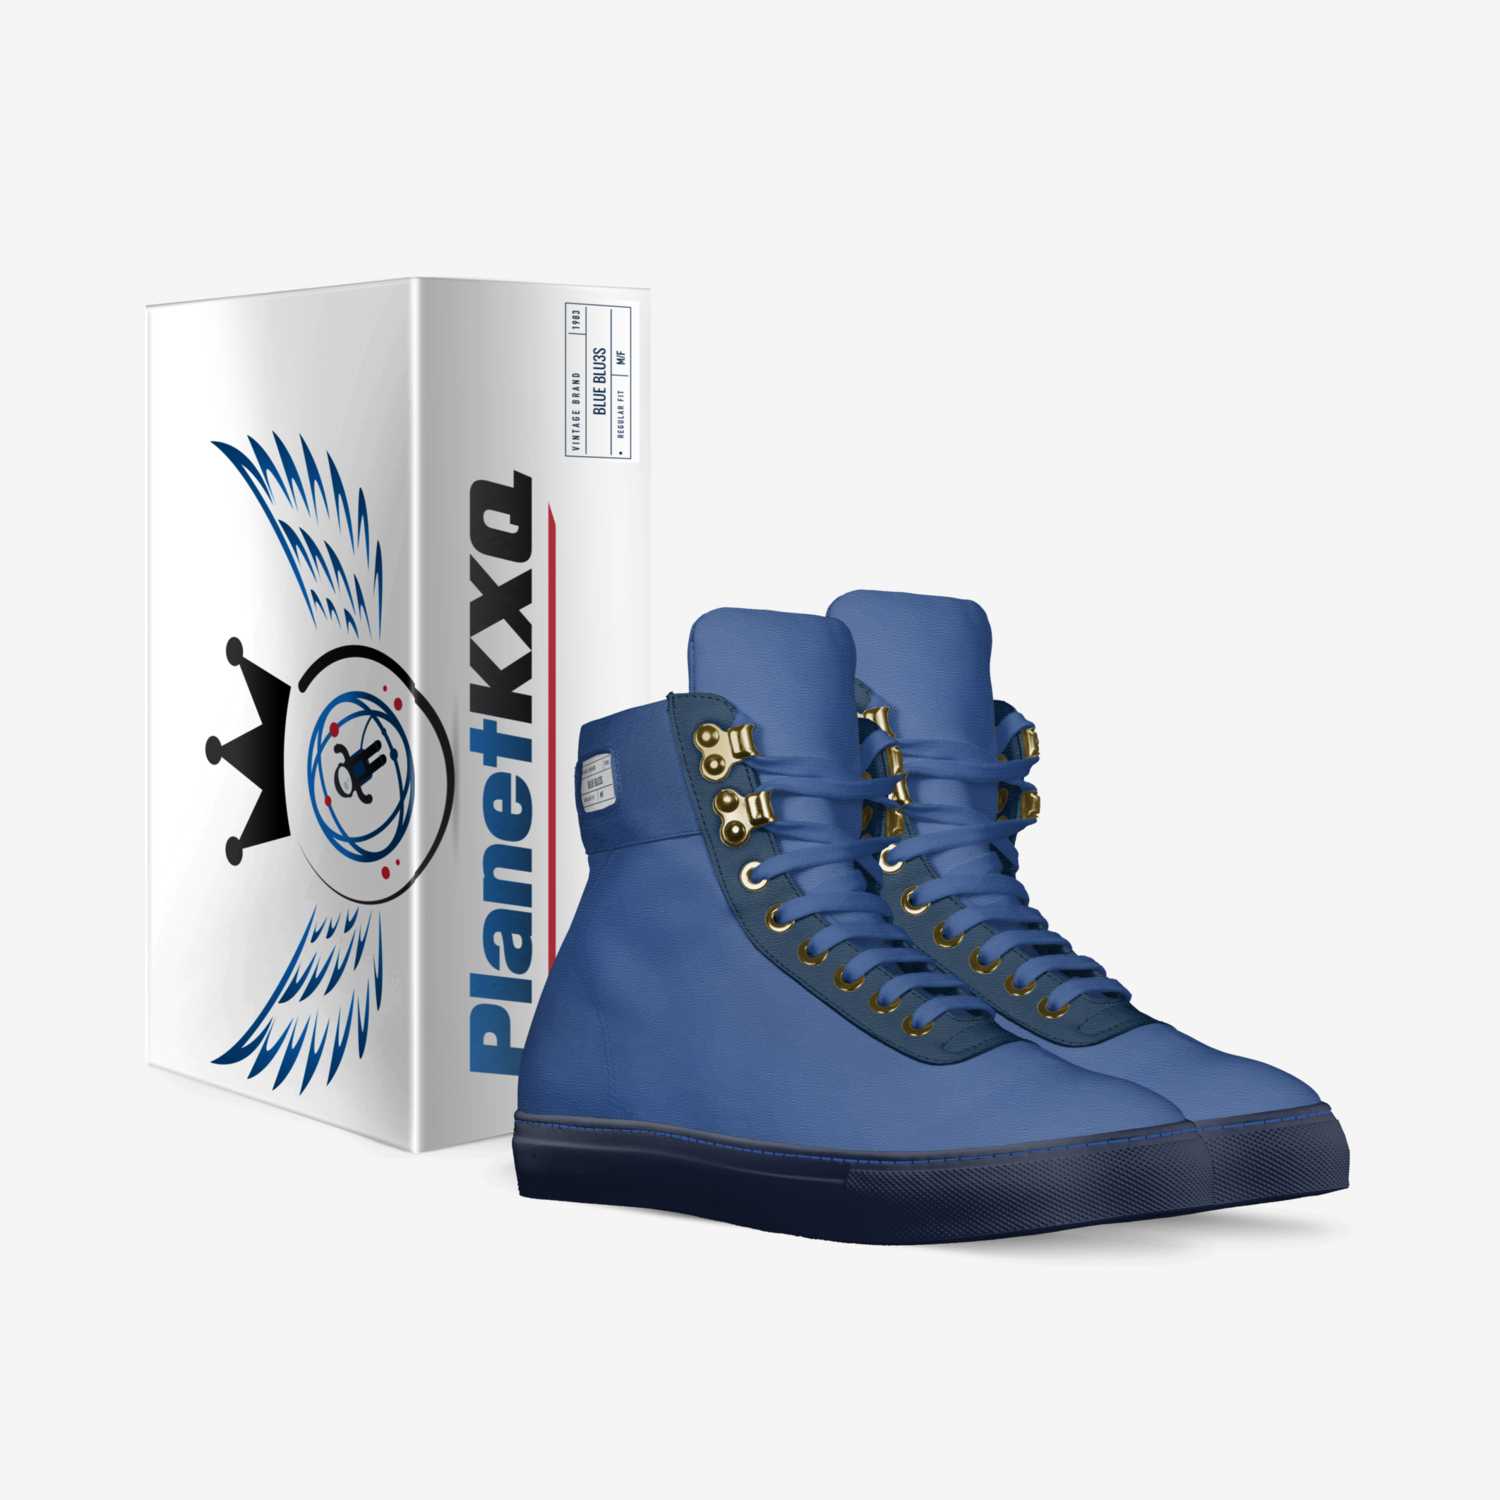 Blue Blu3s custom made in Italy shoes by Kxng Ko | Box view